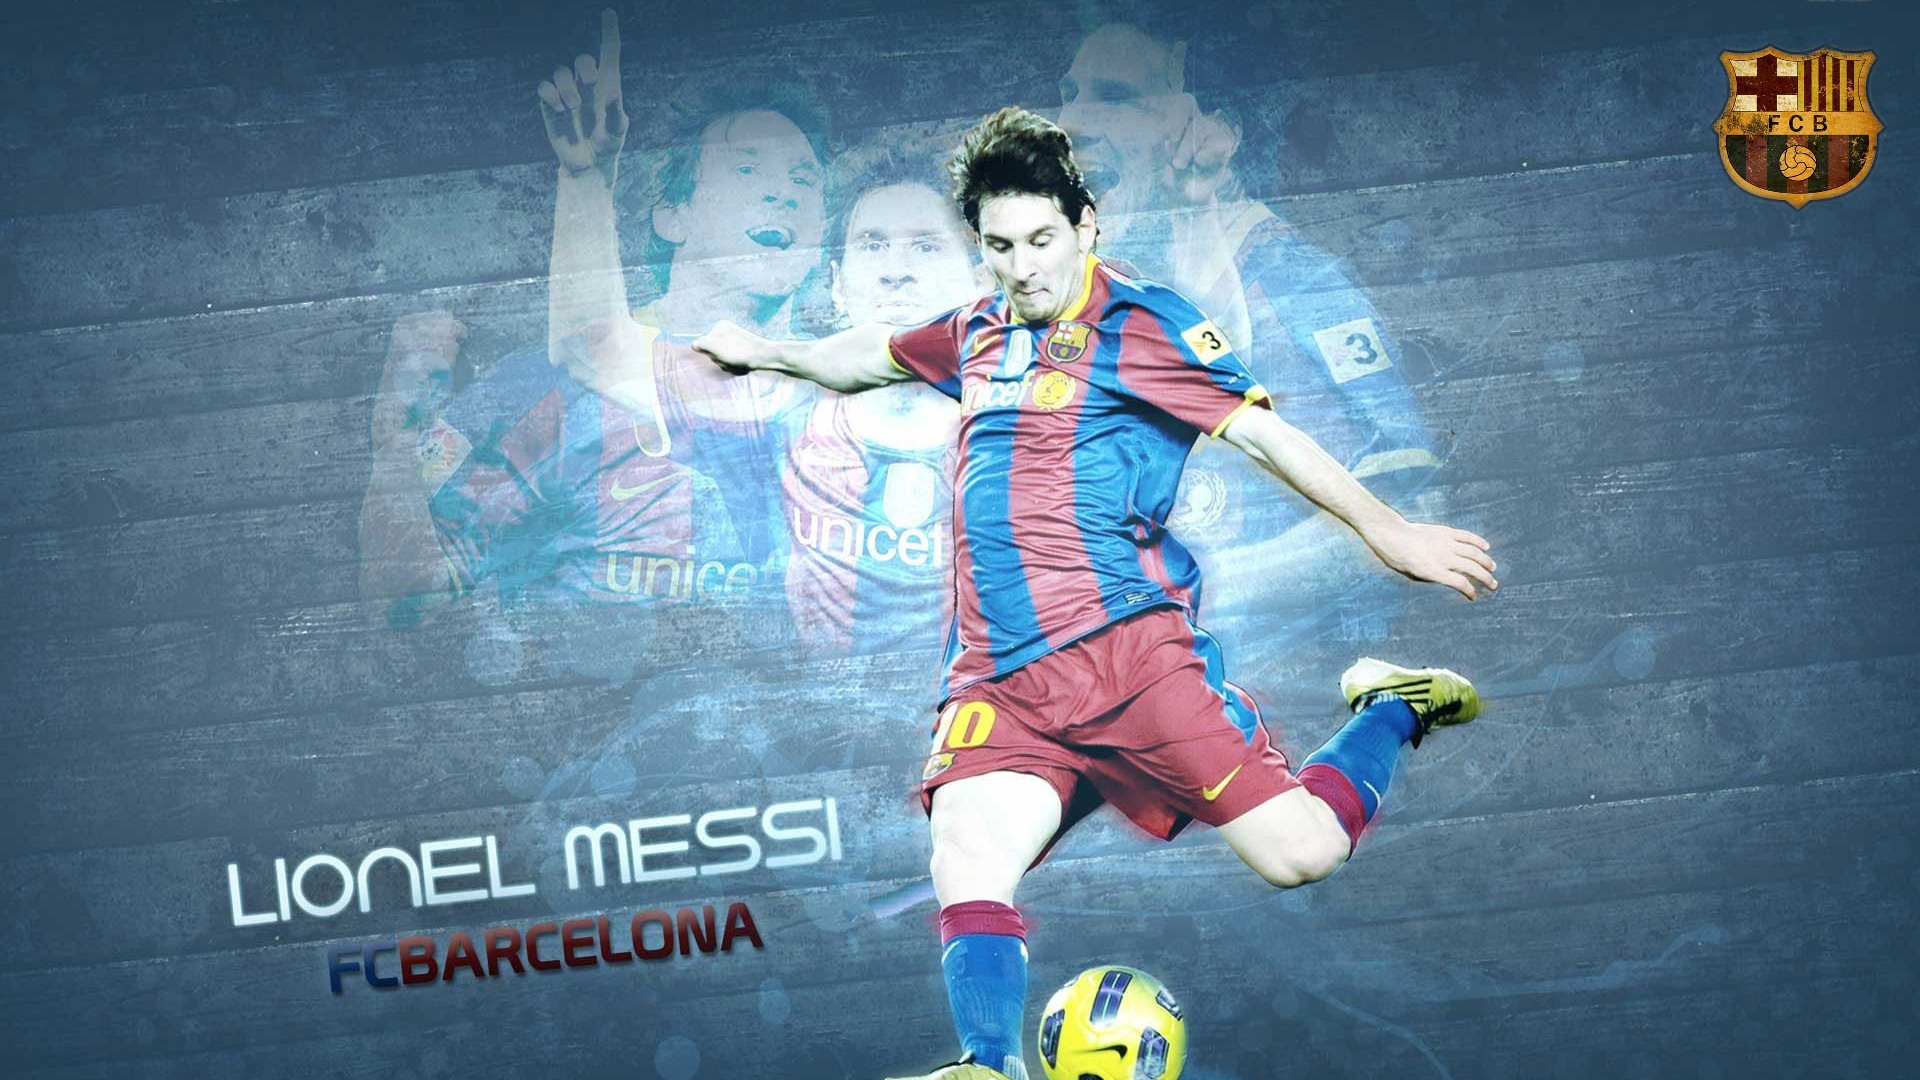 Messi For PC Wallpaper With Resolution 1920X1080 pixel. You can make this wallpaper for your Mac or Windows Desktop Background, iPhone, Android or Tablet and another Smartphone device for free